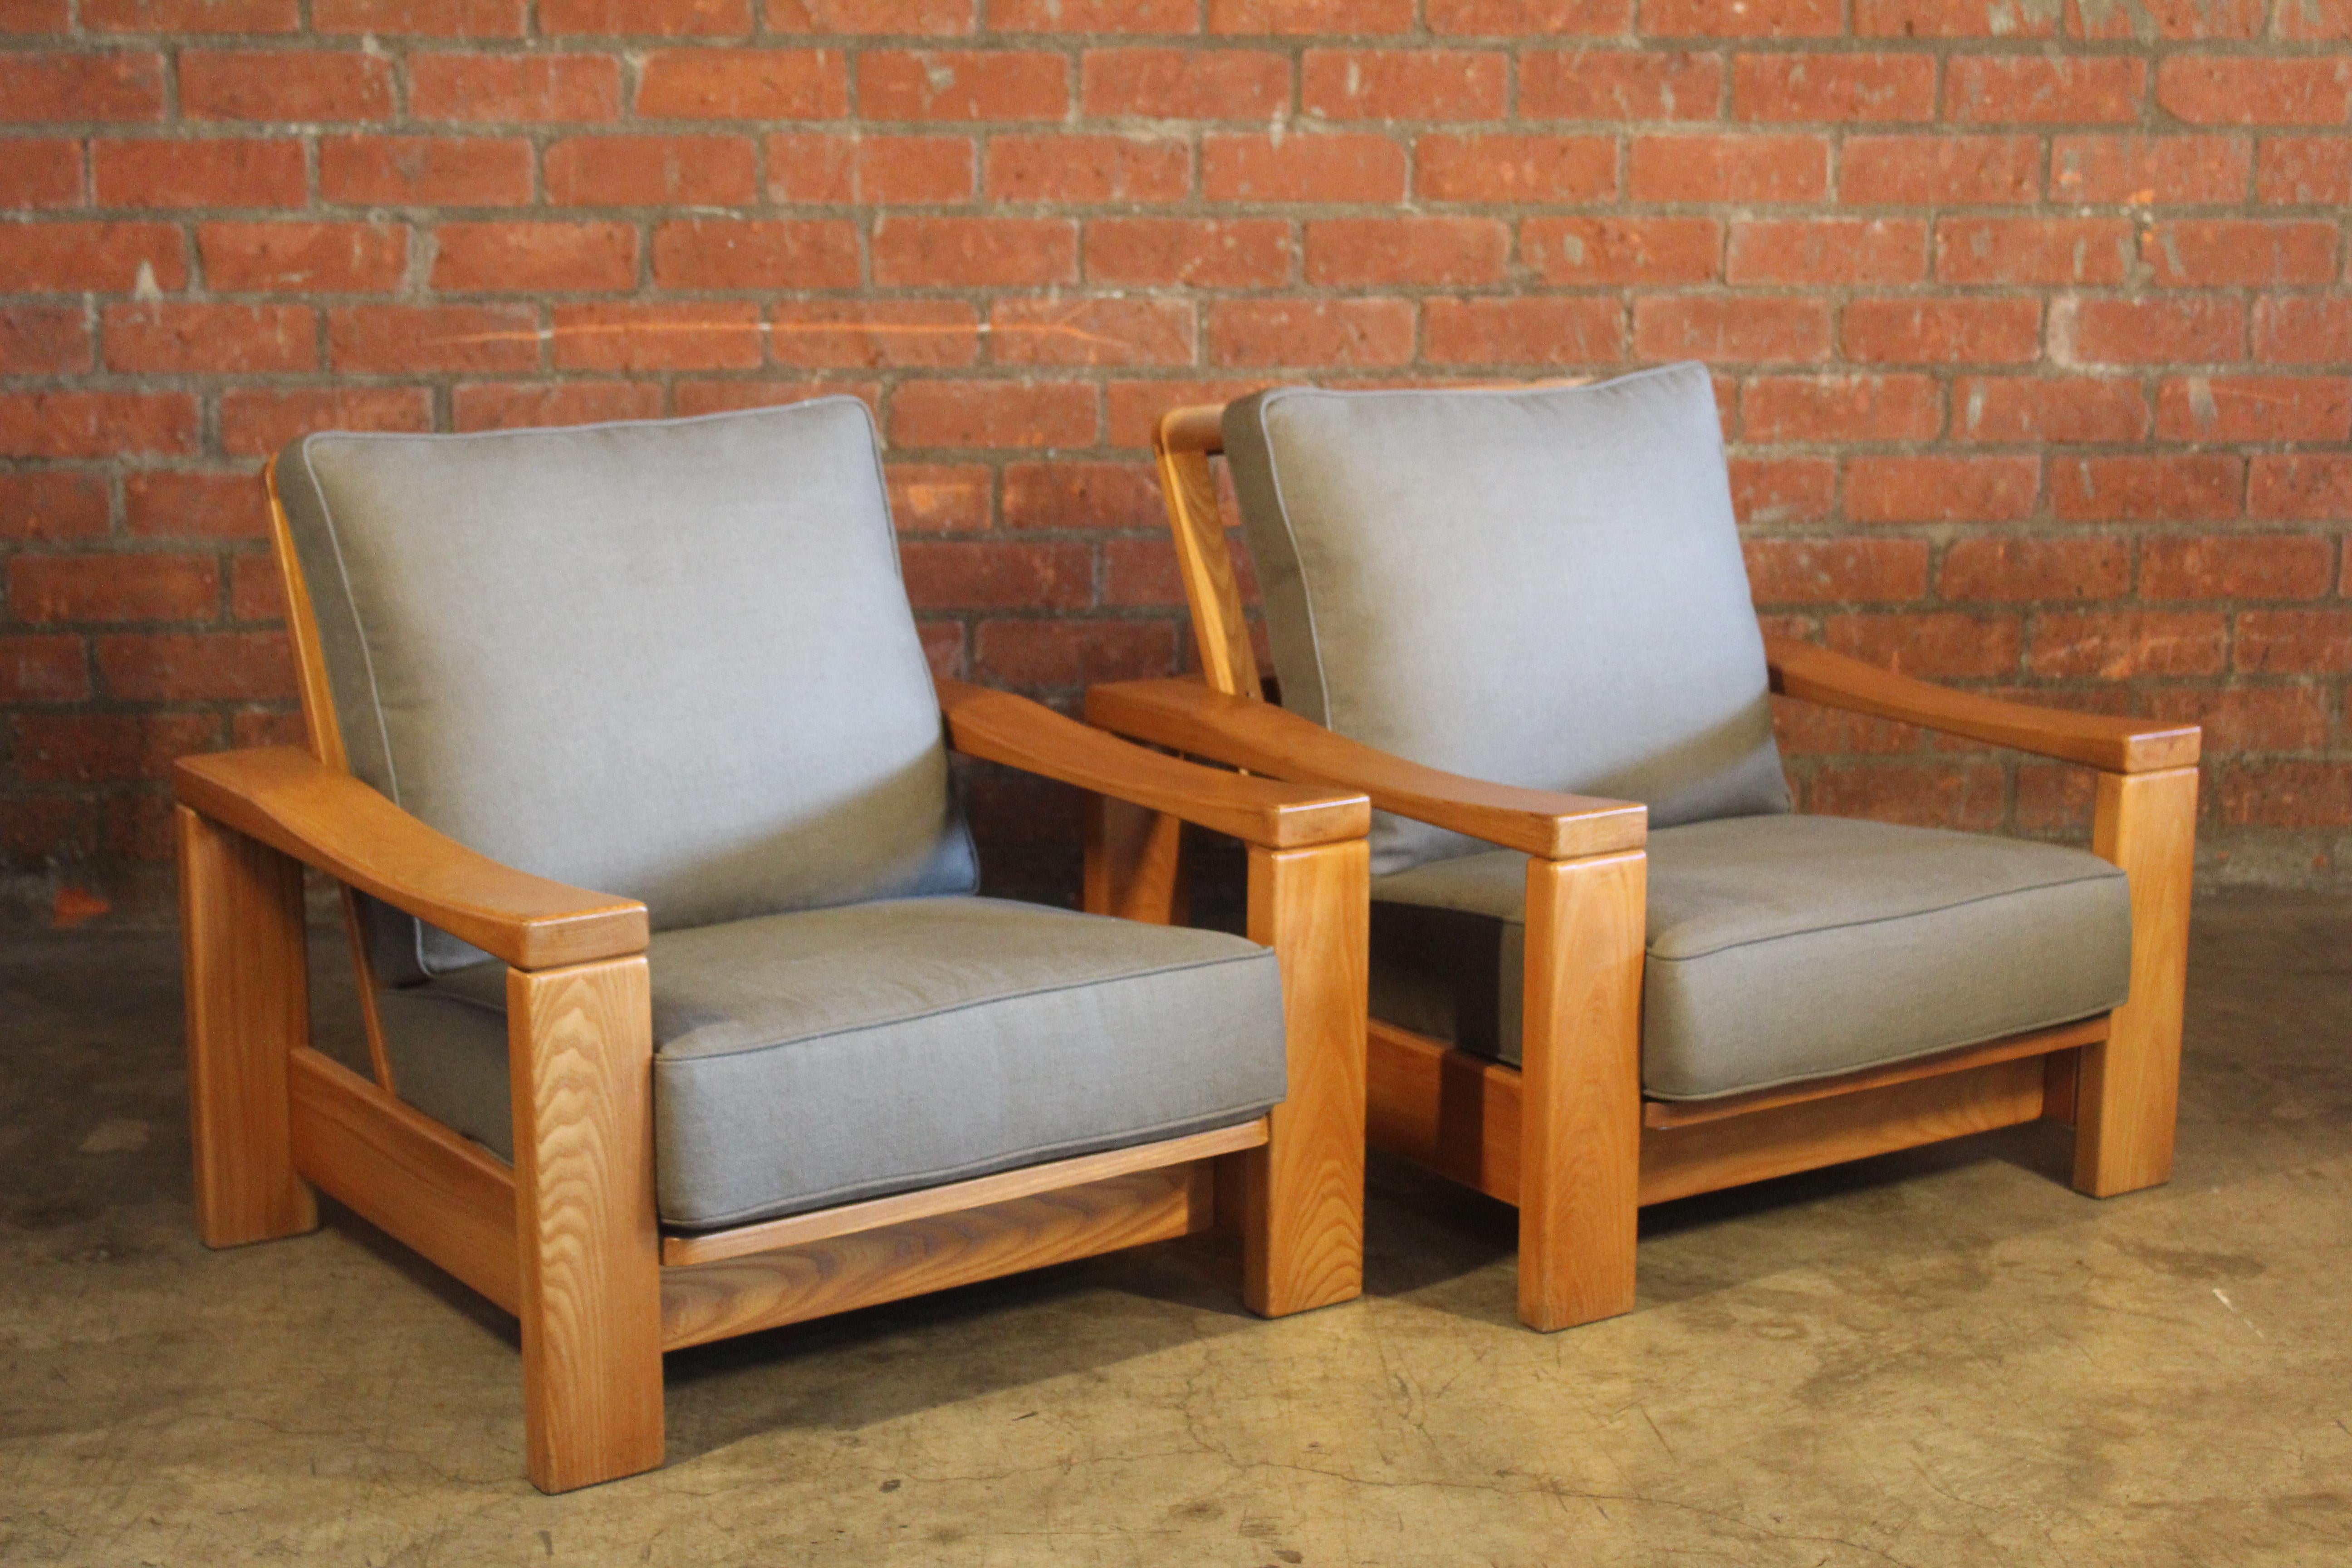 Pair of solid elm lounge chairs from France, 1970s. Newly upholstered in an olive green Belgian linen. The pair are in good condition with original finish to the elm wood frames. They show very minimal signs of wear.